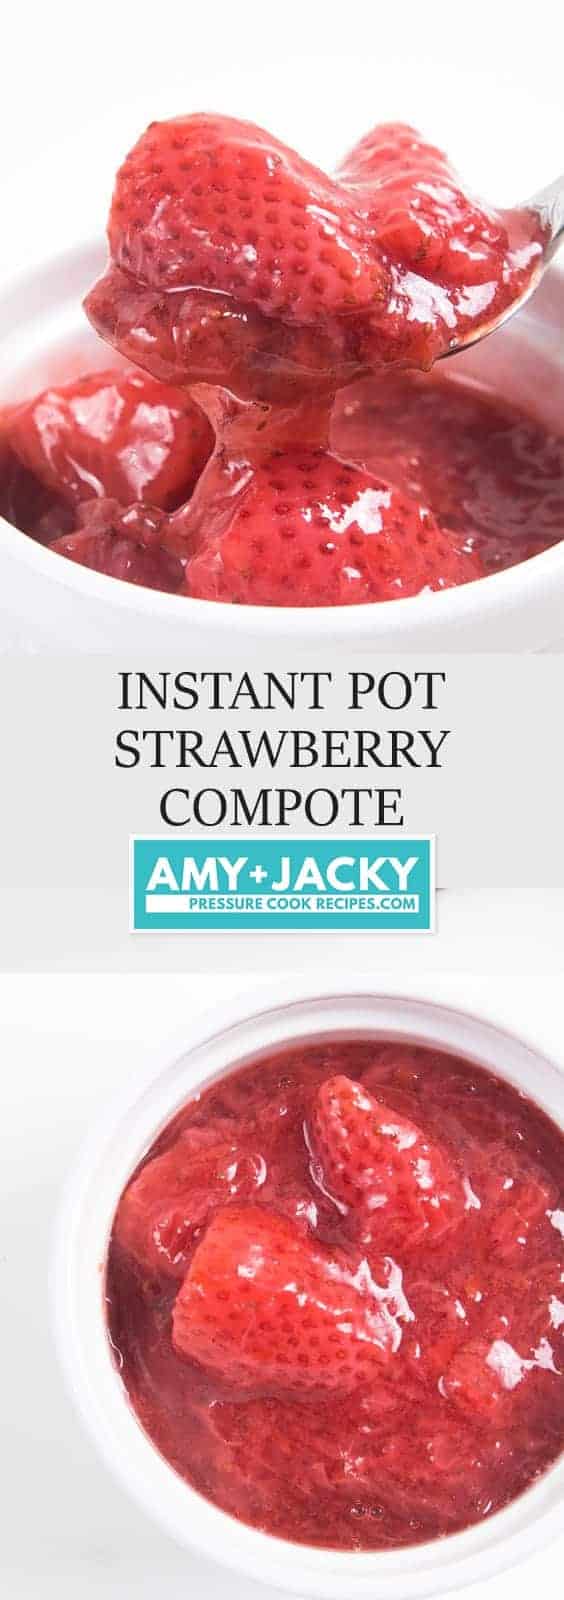 How to make Instant Pot Strawberry Compote Recipe (Pressure Cooker Strawberry Compote): Luscious Sweet 6-ingredient Strawberry Sauce will have you licking your spoons. Great topping for cheesecake or breakfast.